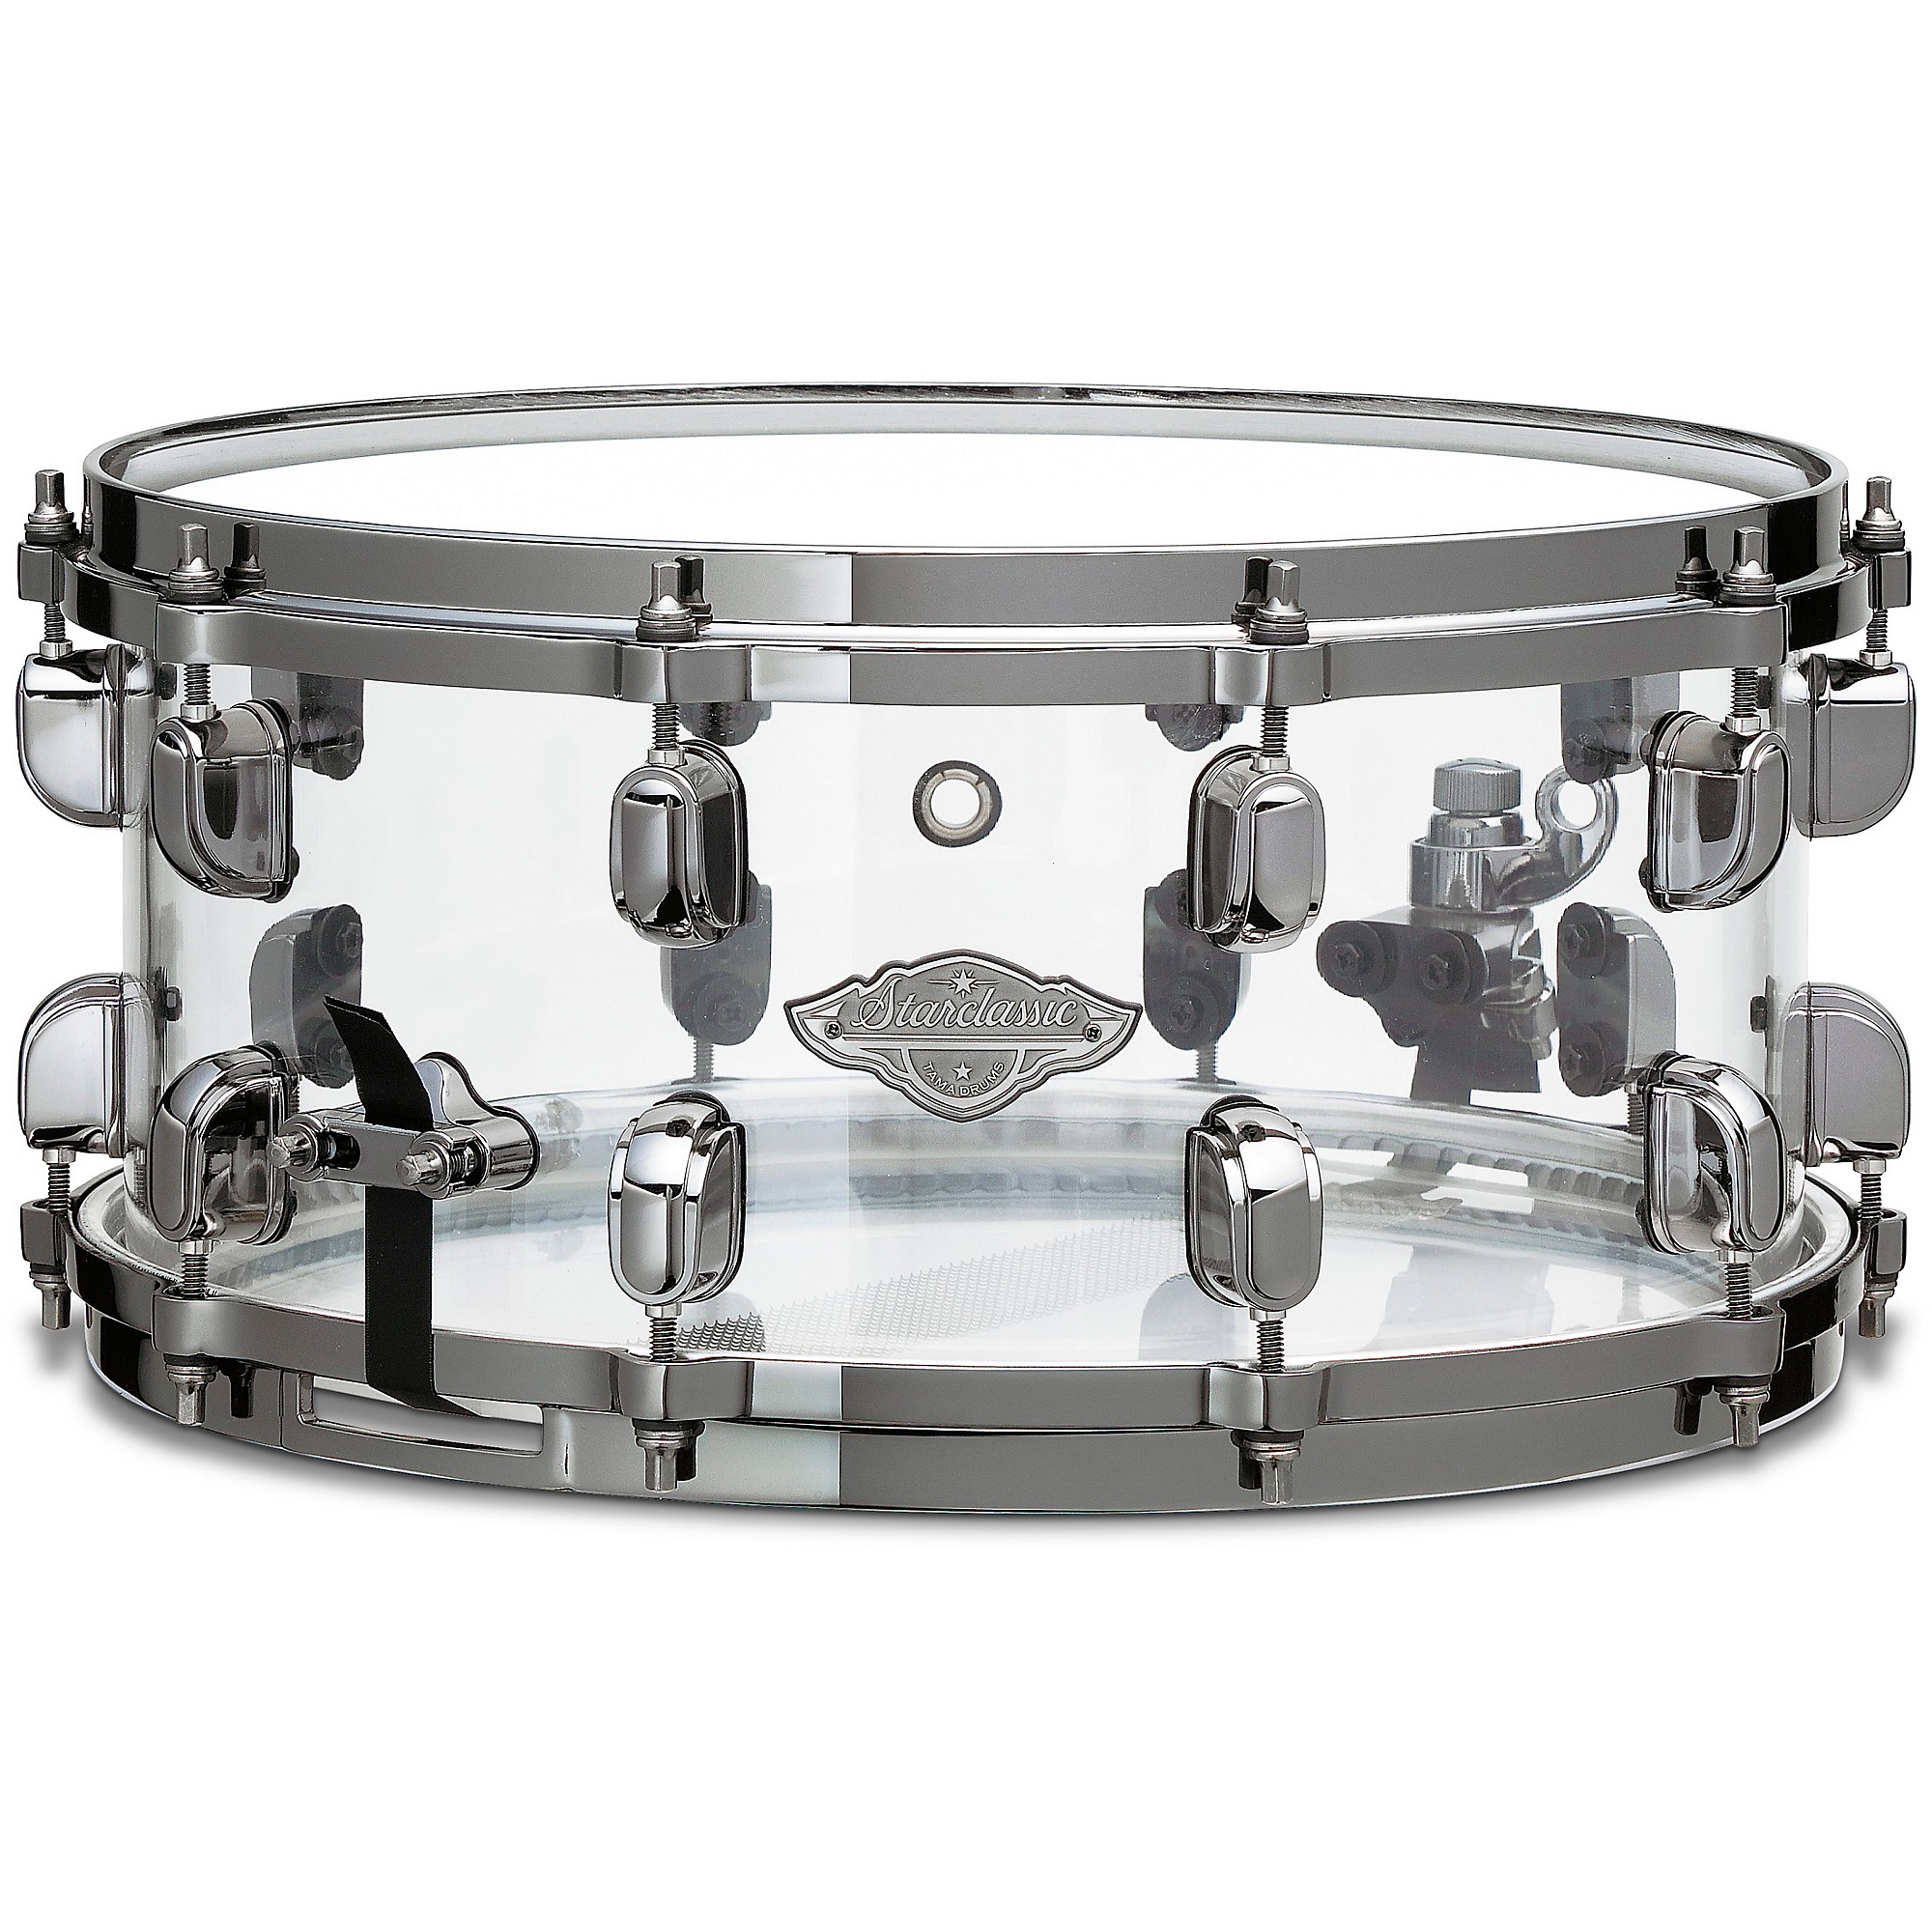 DW Design Series 14 x 6 Seamless Acrylic Snare Drum, Clear at